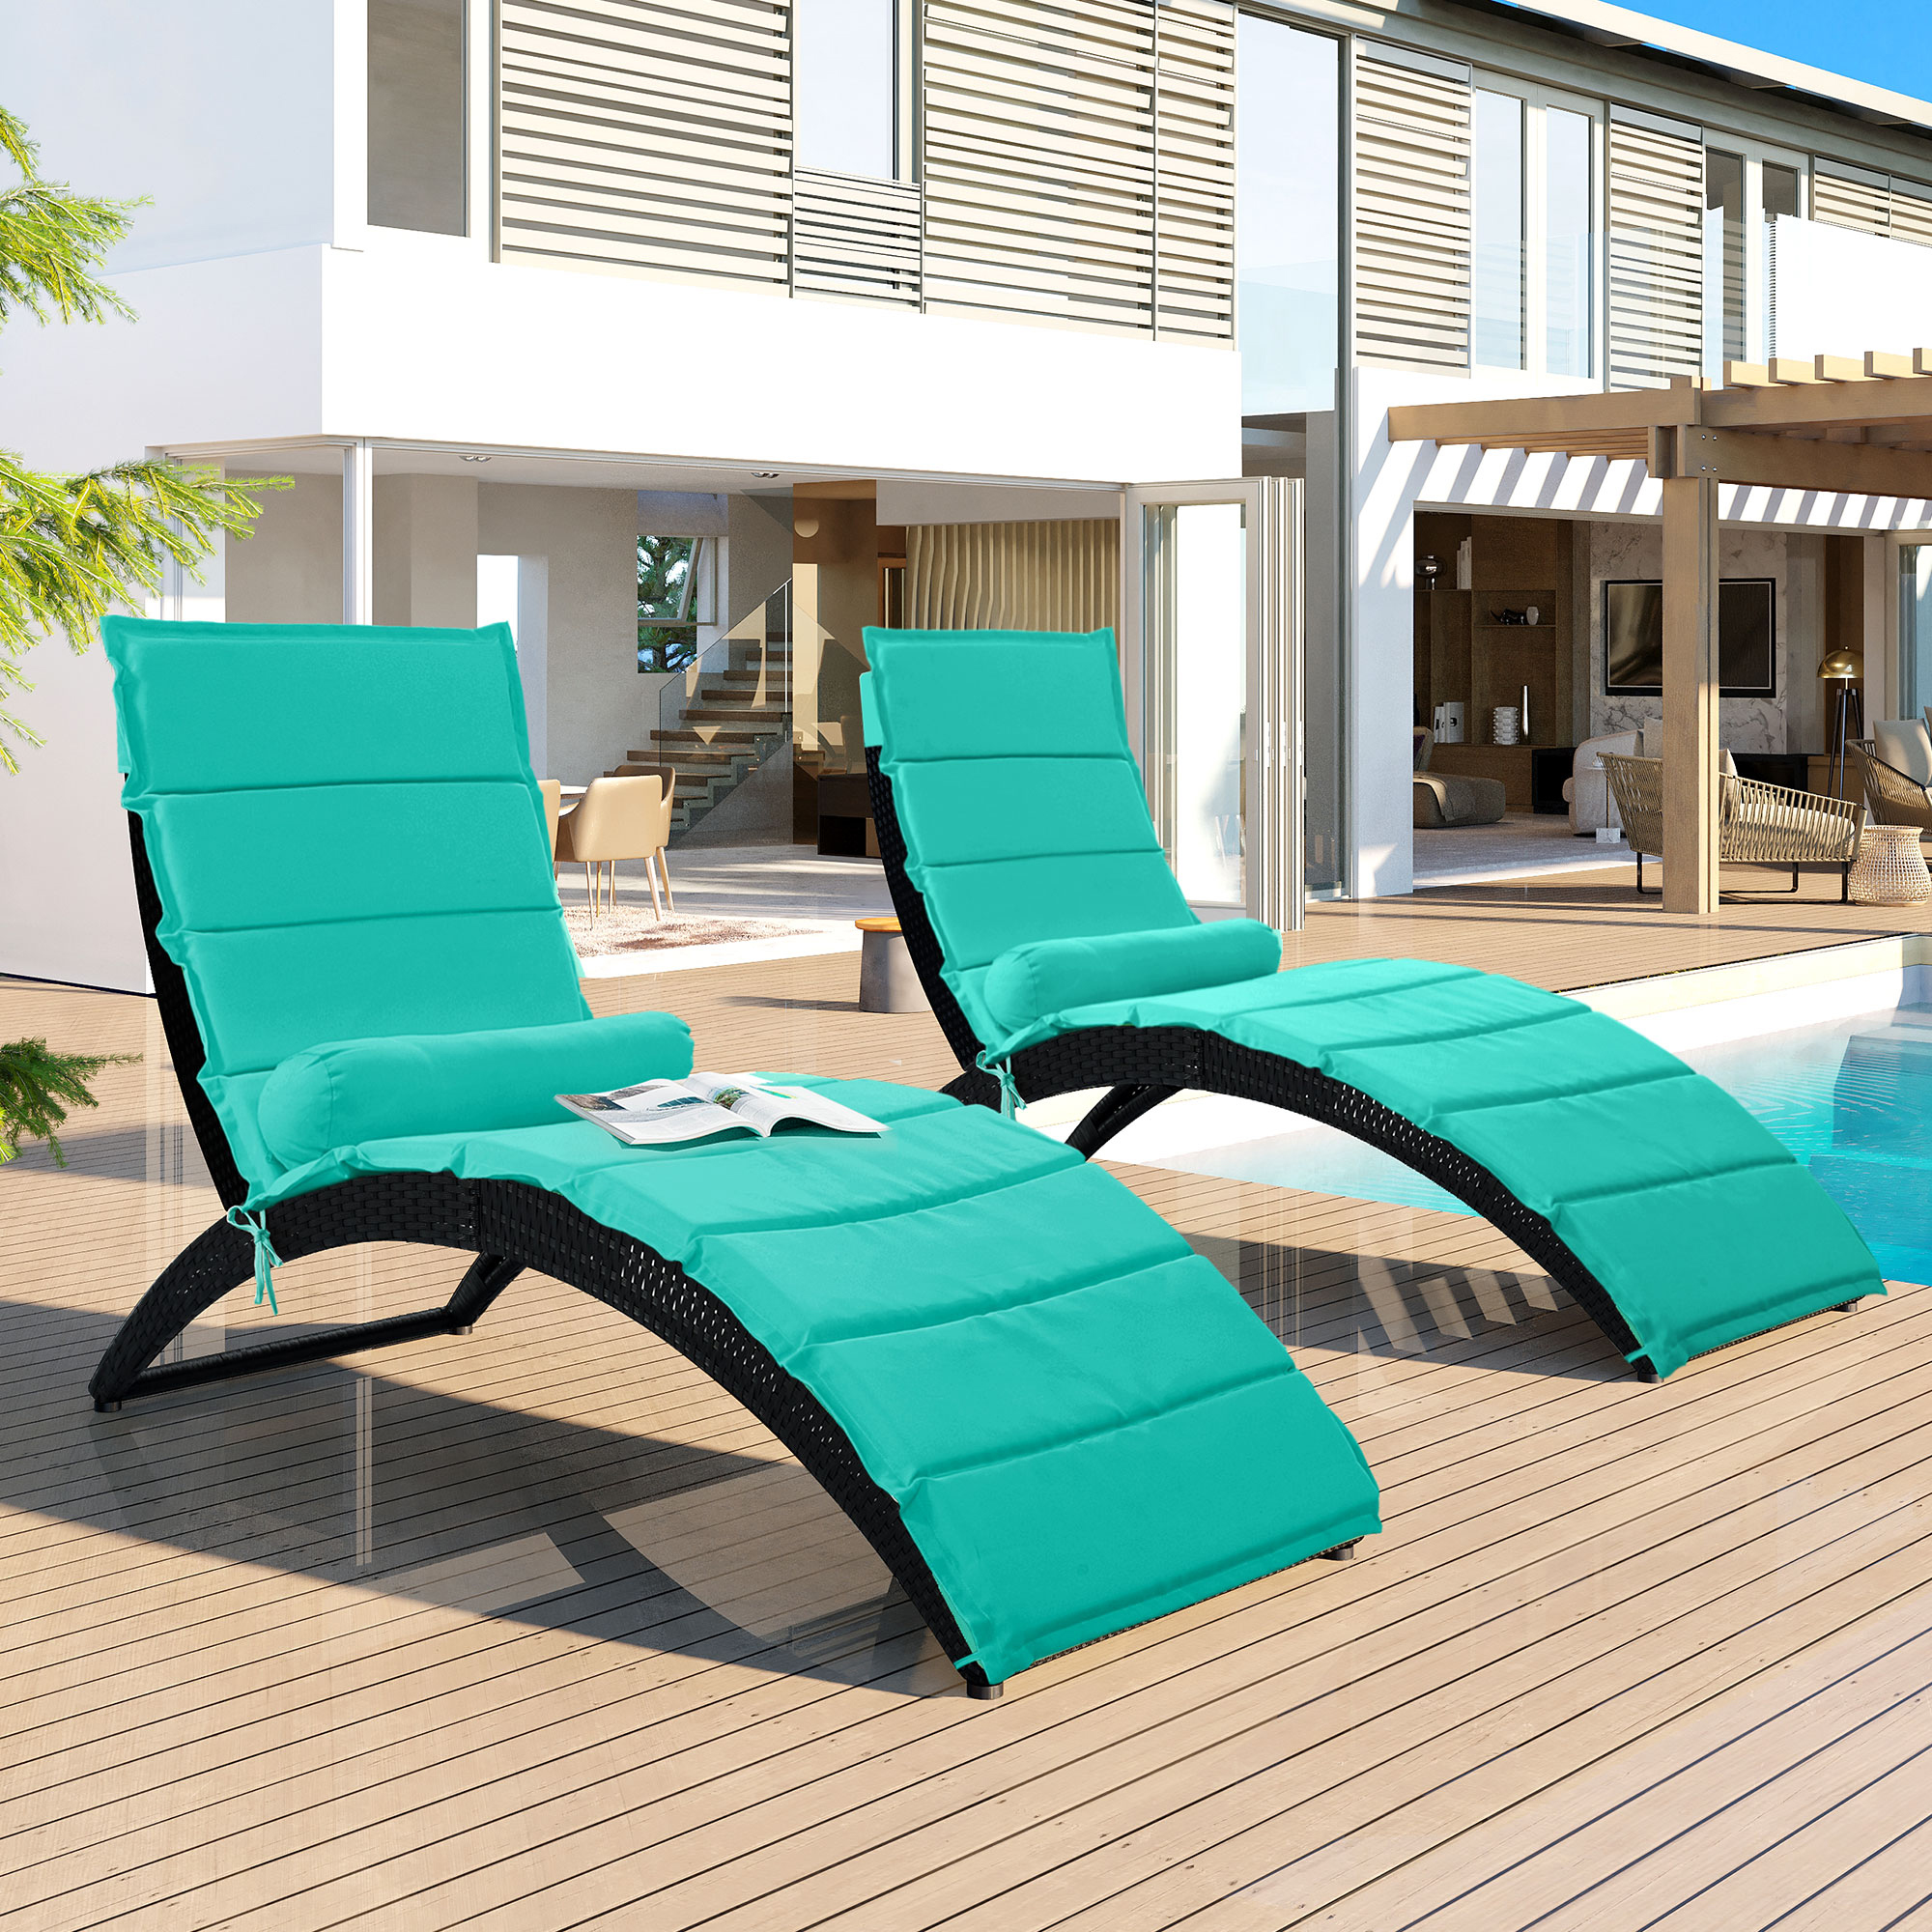 Chaise Lounge Set of 2, Outdoor Lounge Chairs, Chaise Lounge Chairs, Patio Reclining Chair Furniture for Poolside, Deck, Backyard, JA2925 - image 2 of 10